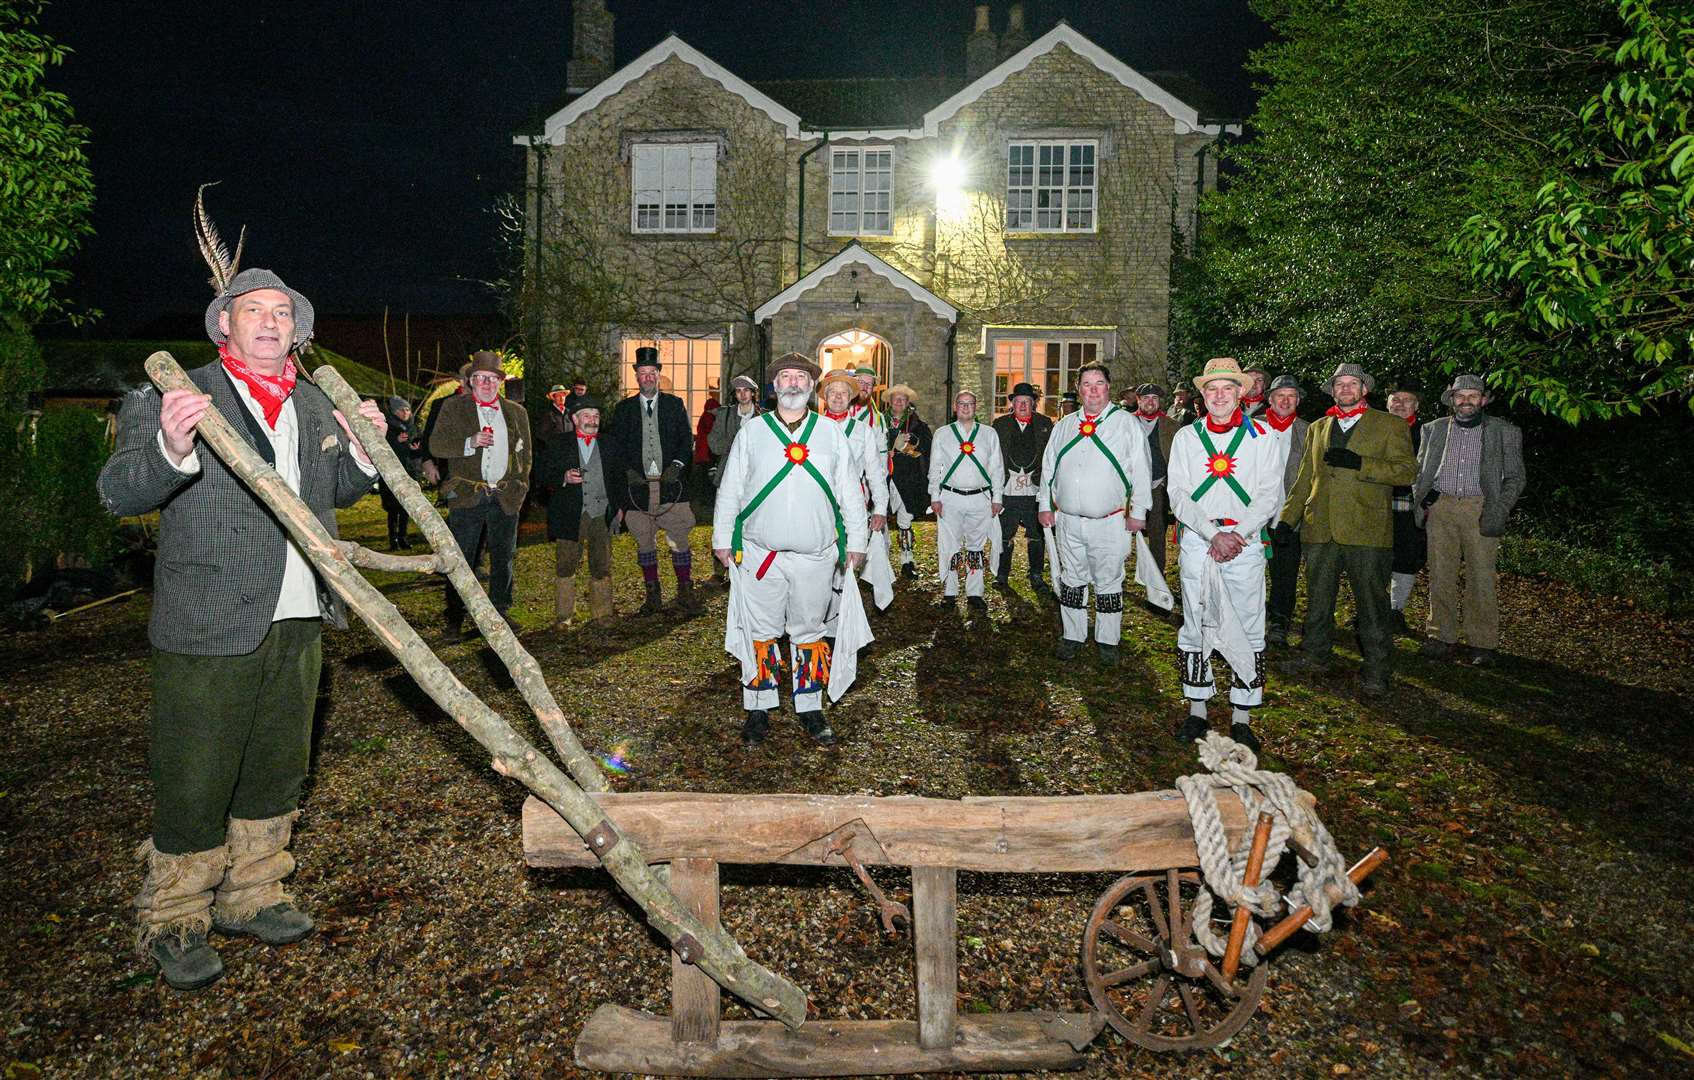 The Balsham Ploughmen and the morris dancers at one of the many stops on the Plough Monday route Pictures by Keith Heppell